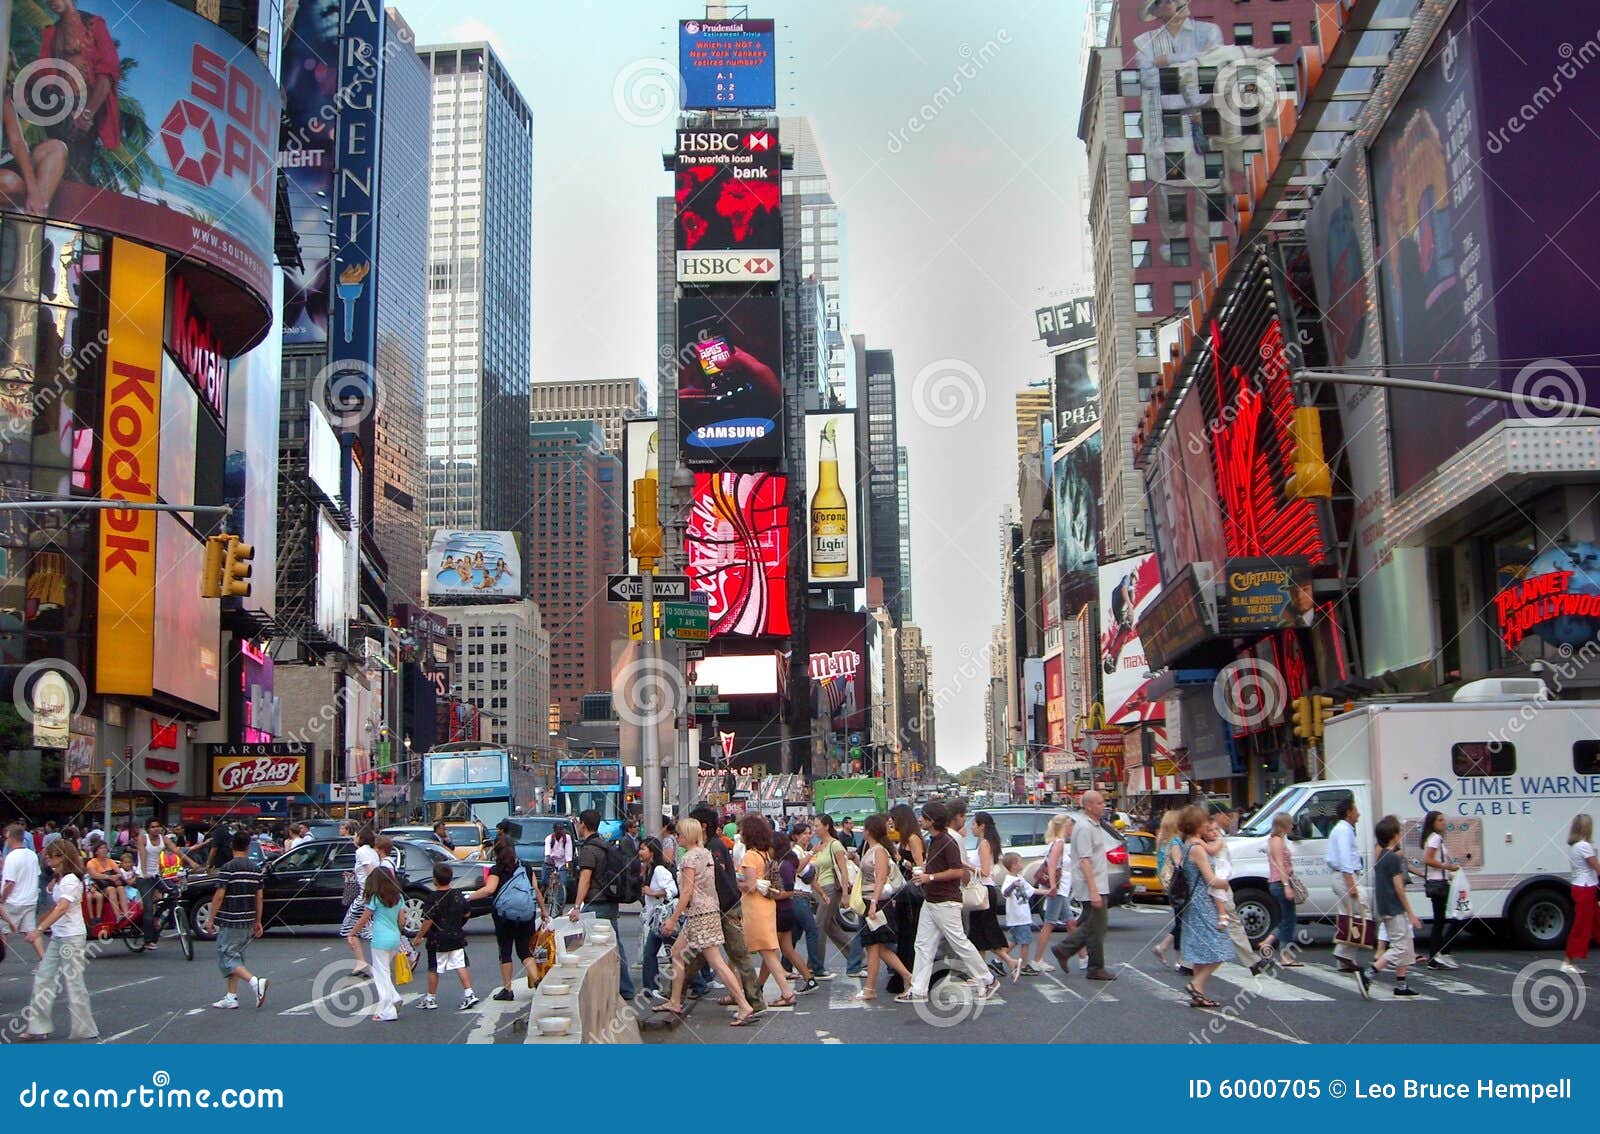 ... vehicles in busy times square new york city mr no pr no 5 18062 147